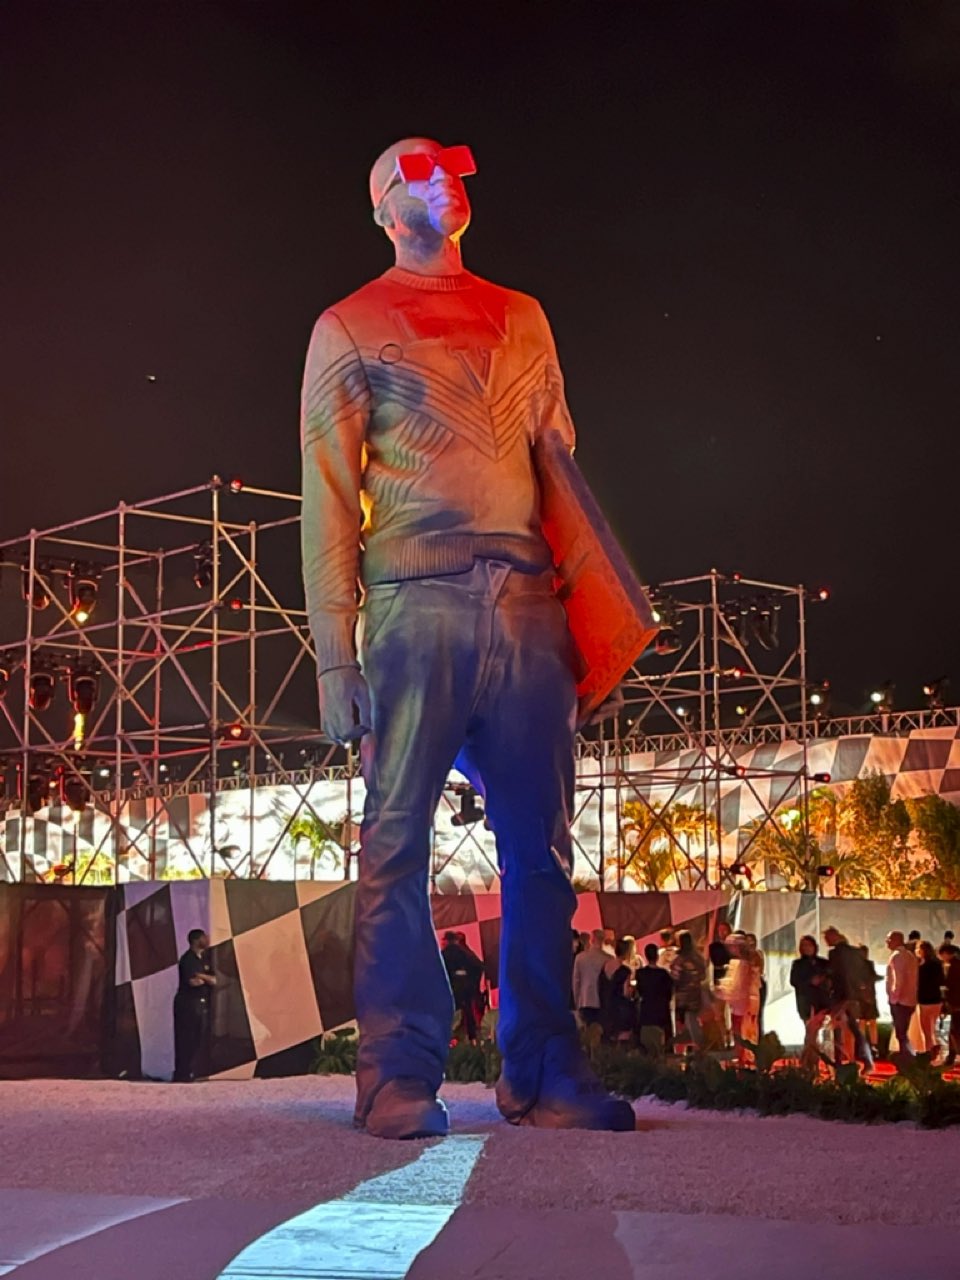 The three story tall Virgil Abloh statue created by Louis Vuitton